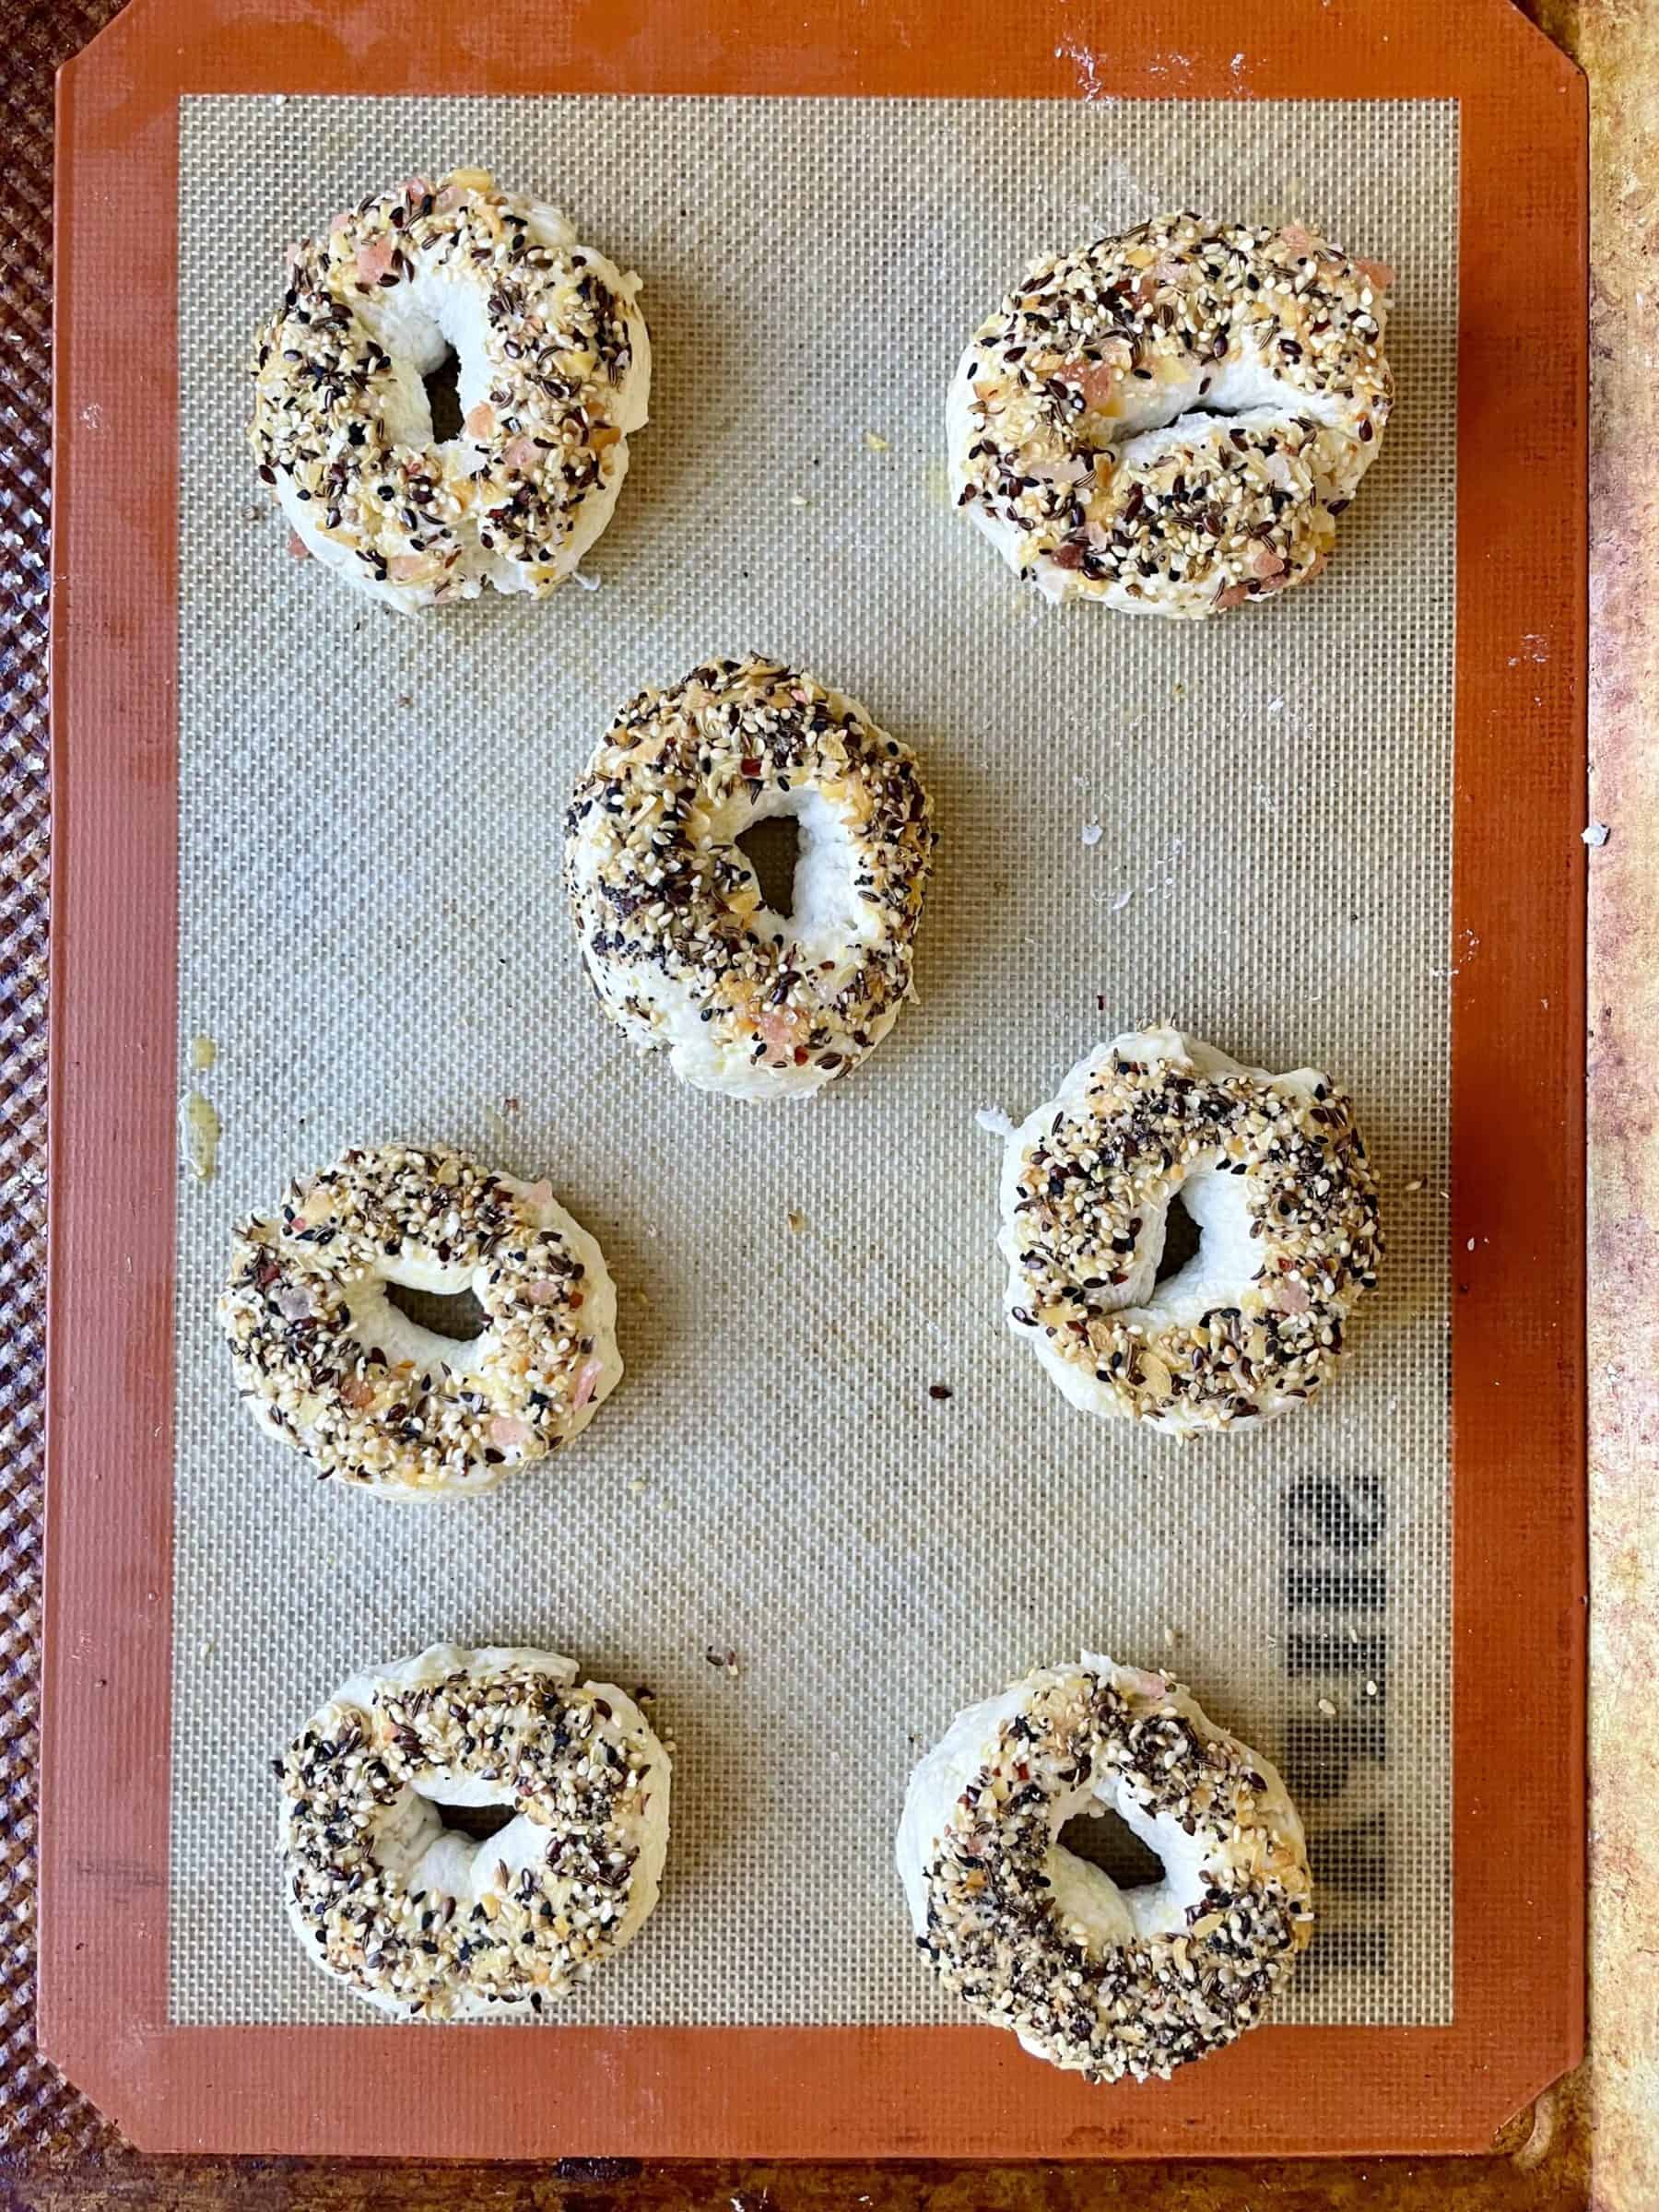 7 bagels on a silpat ready for the oven